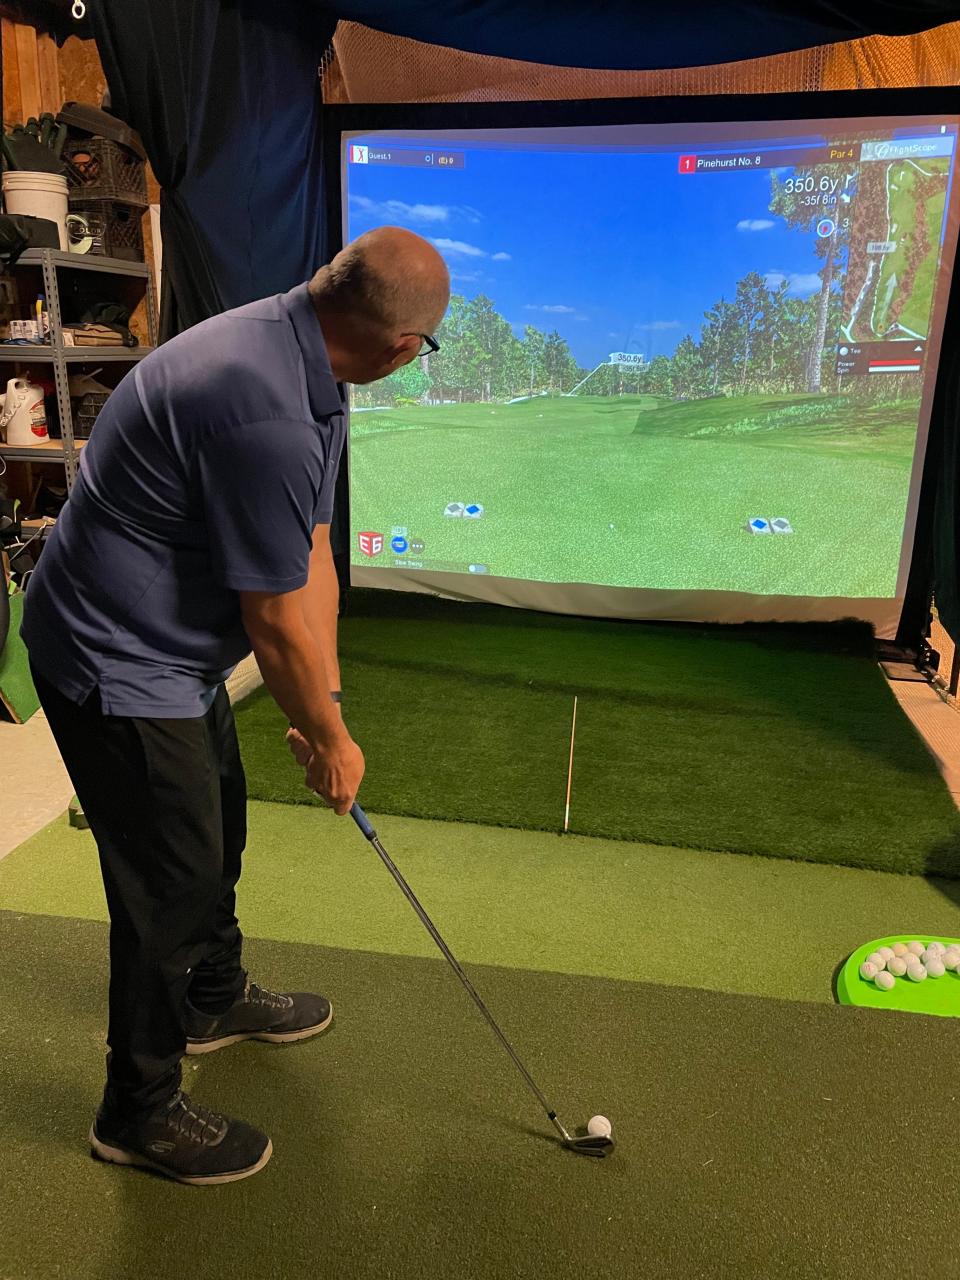 The simulator at Tennessee Tee driving range gives golfers an opportunity to "play" one of 26 courses across the country.